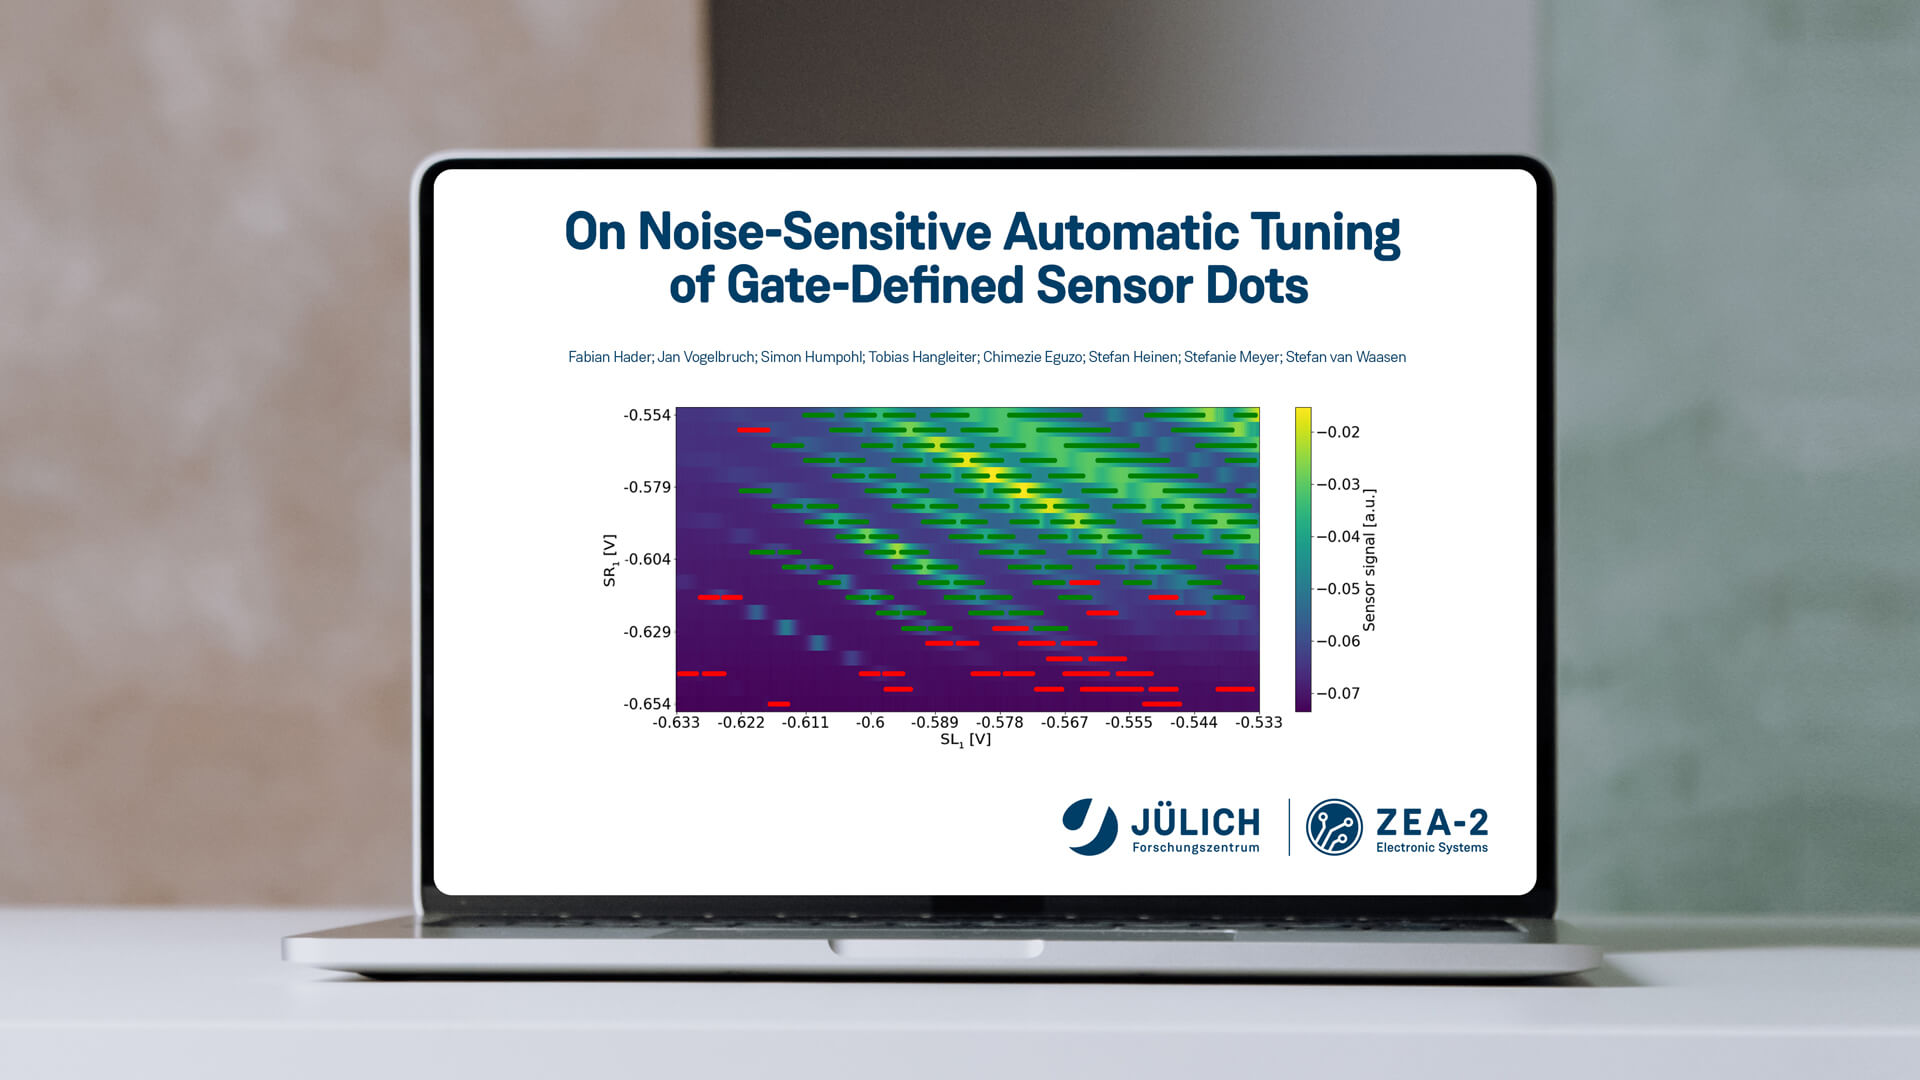 Paper "On Noise-Sensitive Automatic Tuning of Gate-Defined Sensor Dots" released in IEEE Transactions on Quantum Engineering